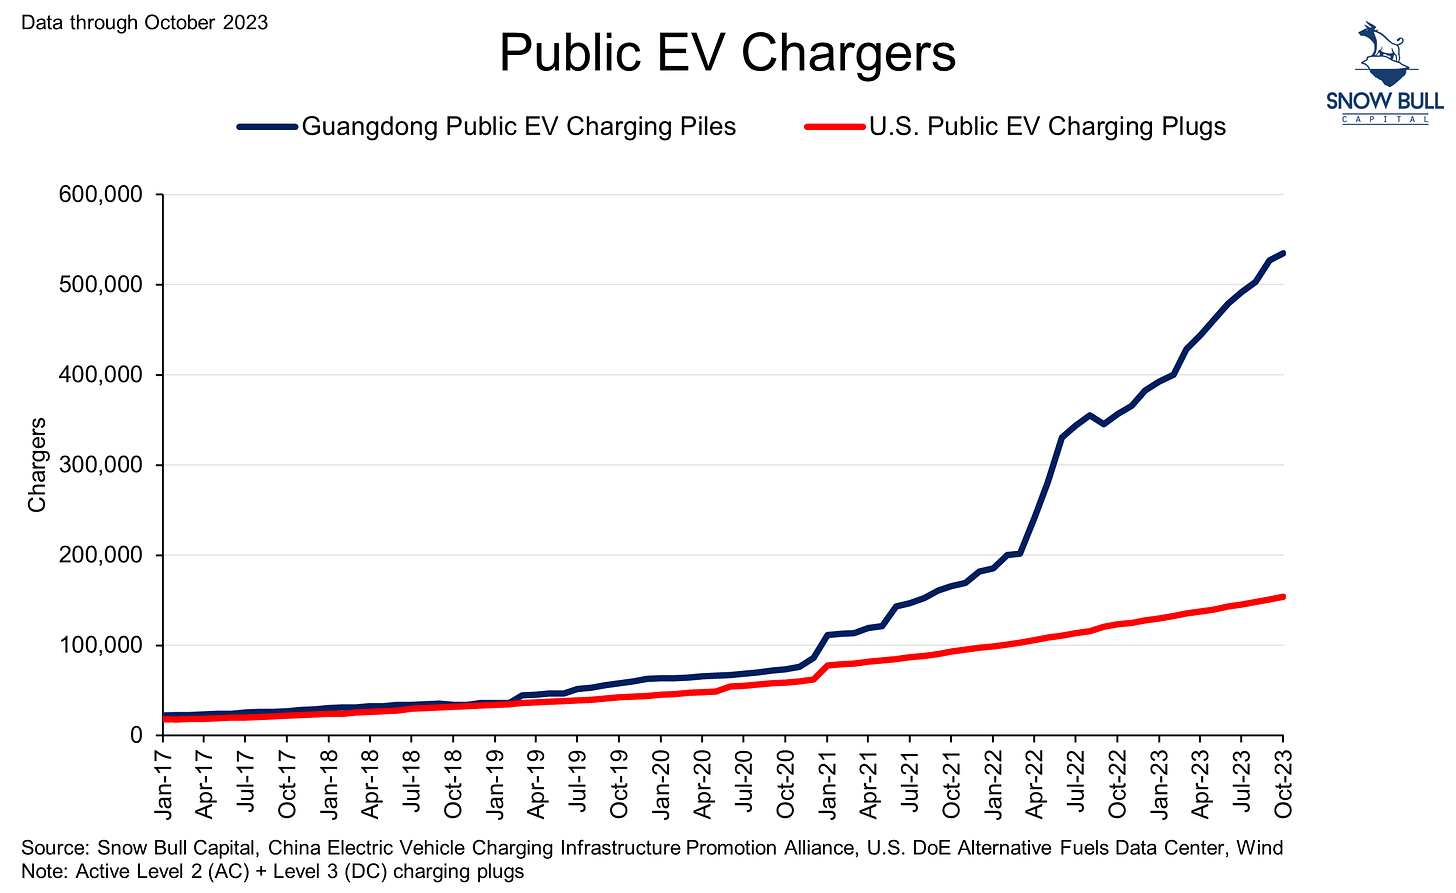 Line graph showing the growth of public EV chargers in Guangdong province in comparison to the U.S. from January 2017 to October 2023. Guangdong's line rises sharply, dwarfing the growth in the U.S.